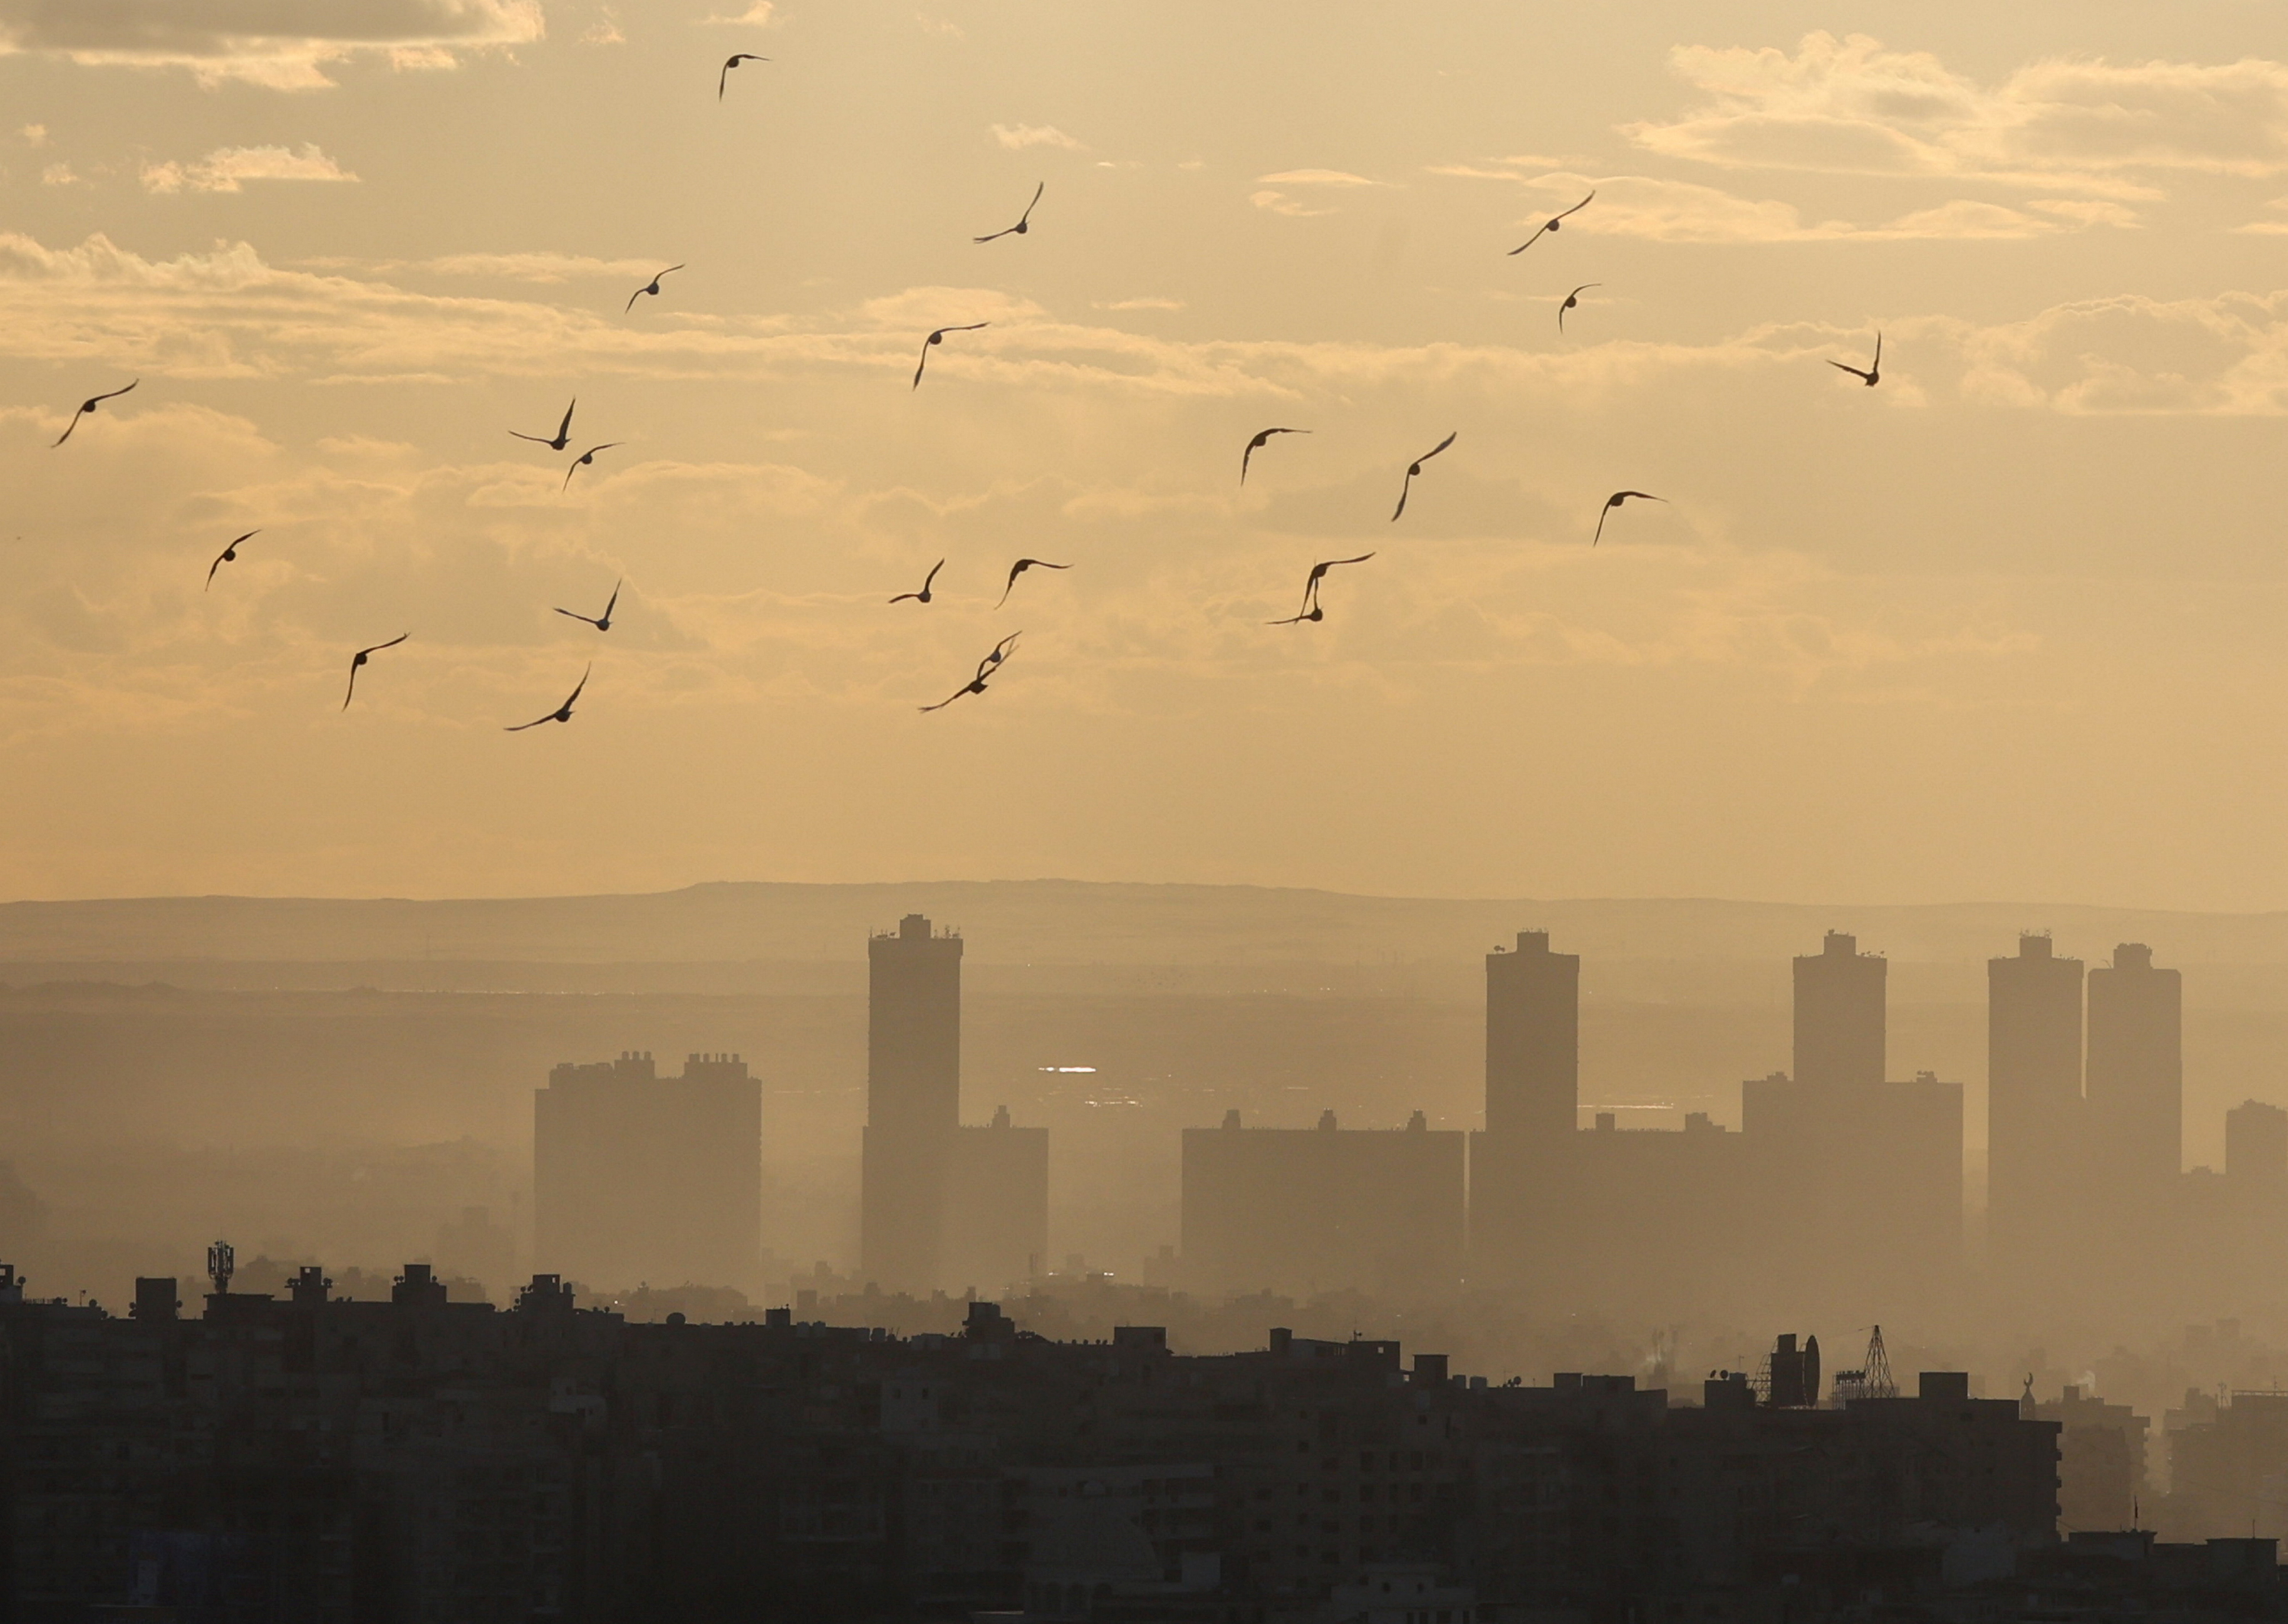 Birds fly during sunset with Cairo skyline visible in the background, during foggy cold weather